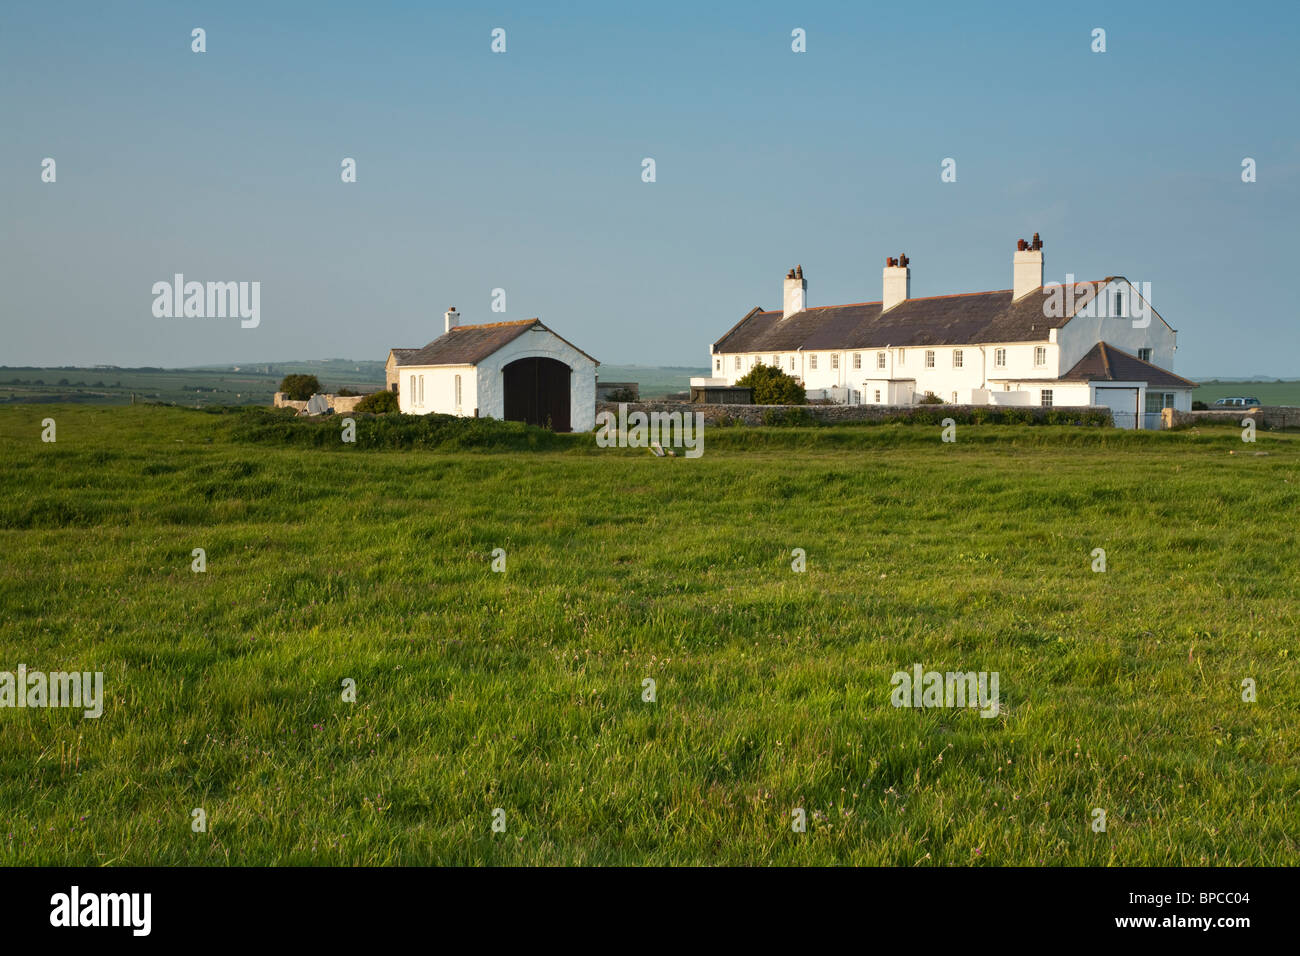 Coastguard Cottages at St Aldhelm's Head on the Isle of Purbeck, Dorset, Uk Stock Photo